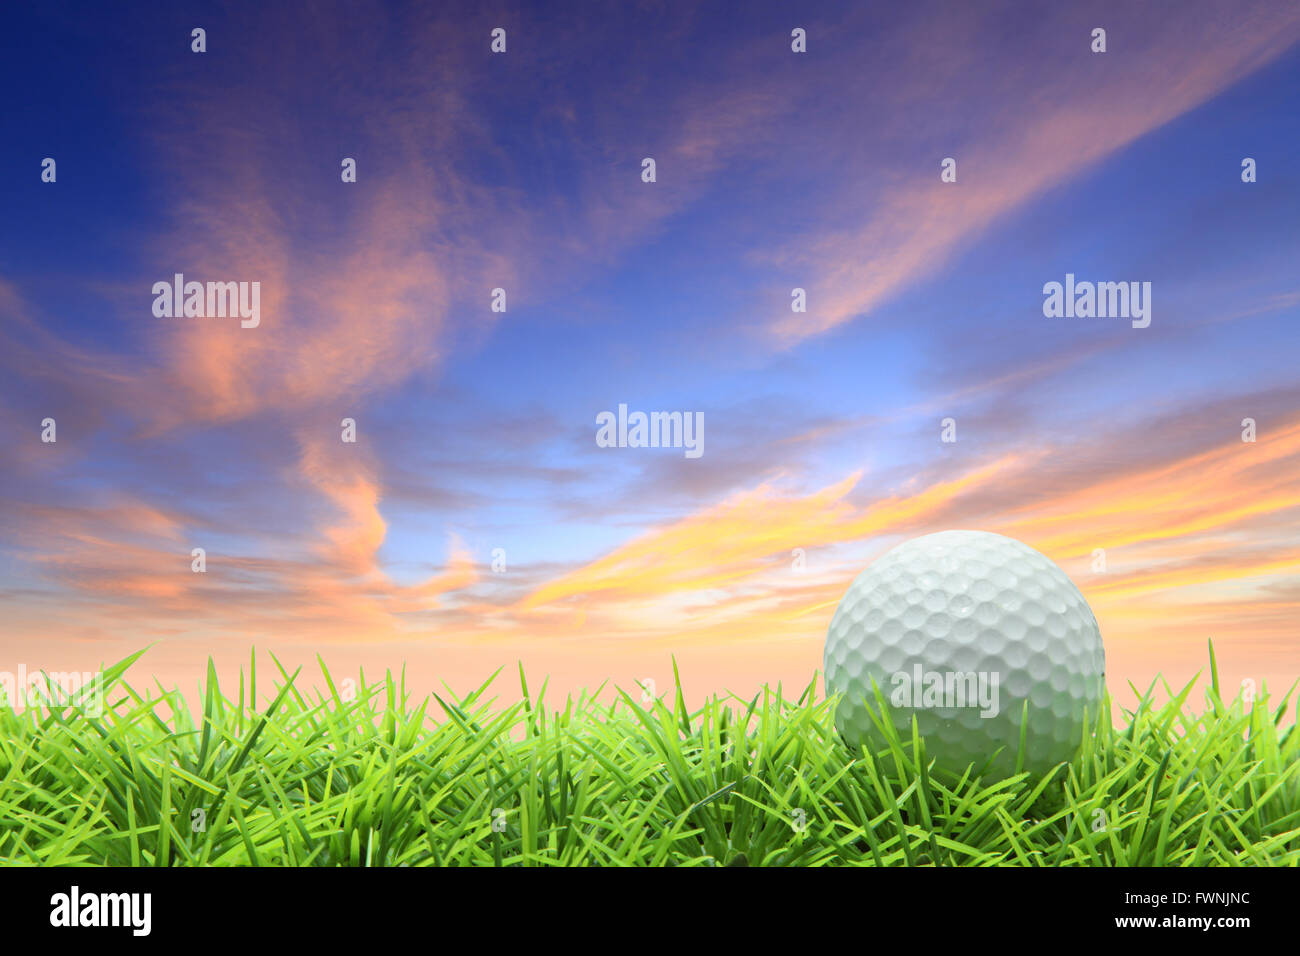 isolated golf ball on green grass over beautiful sky Stock Photo